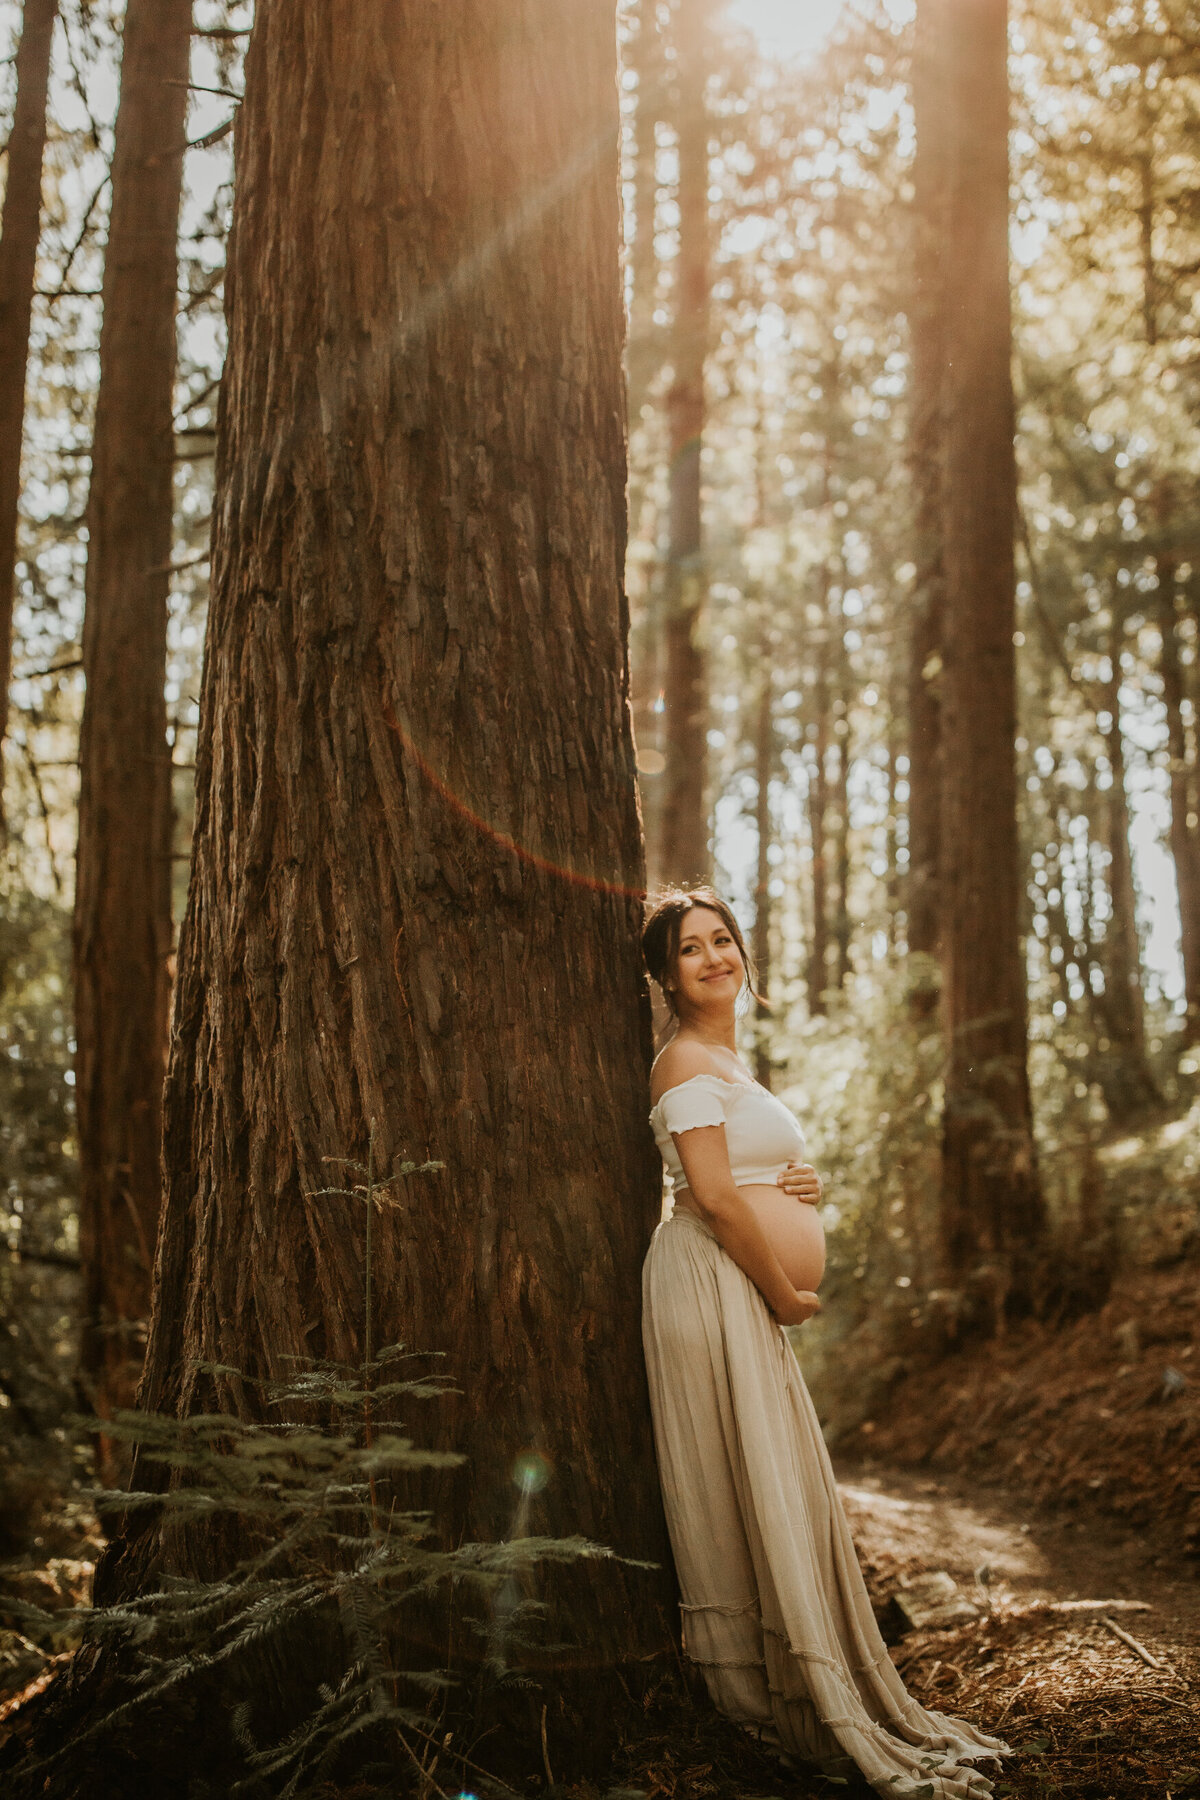 Bay Area maternity photoshoot in East Bay redwoods with mom leaning against tree and holding her bare belly while smiling at camera